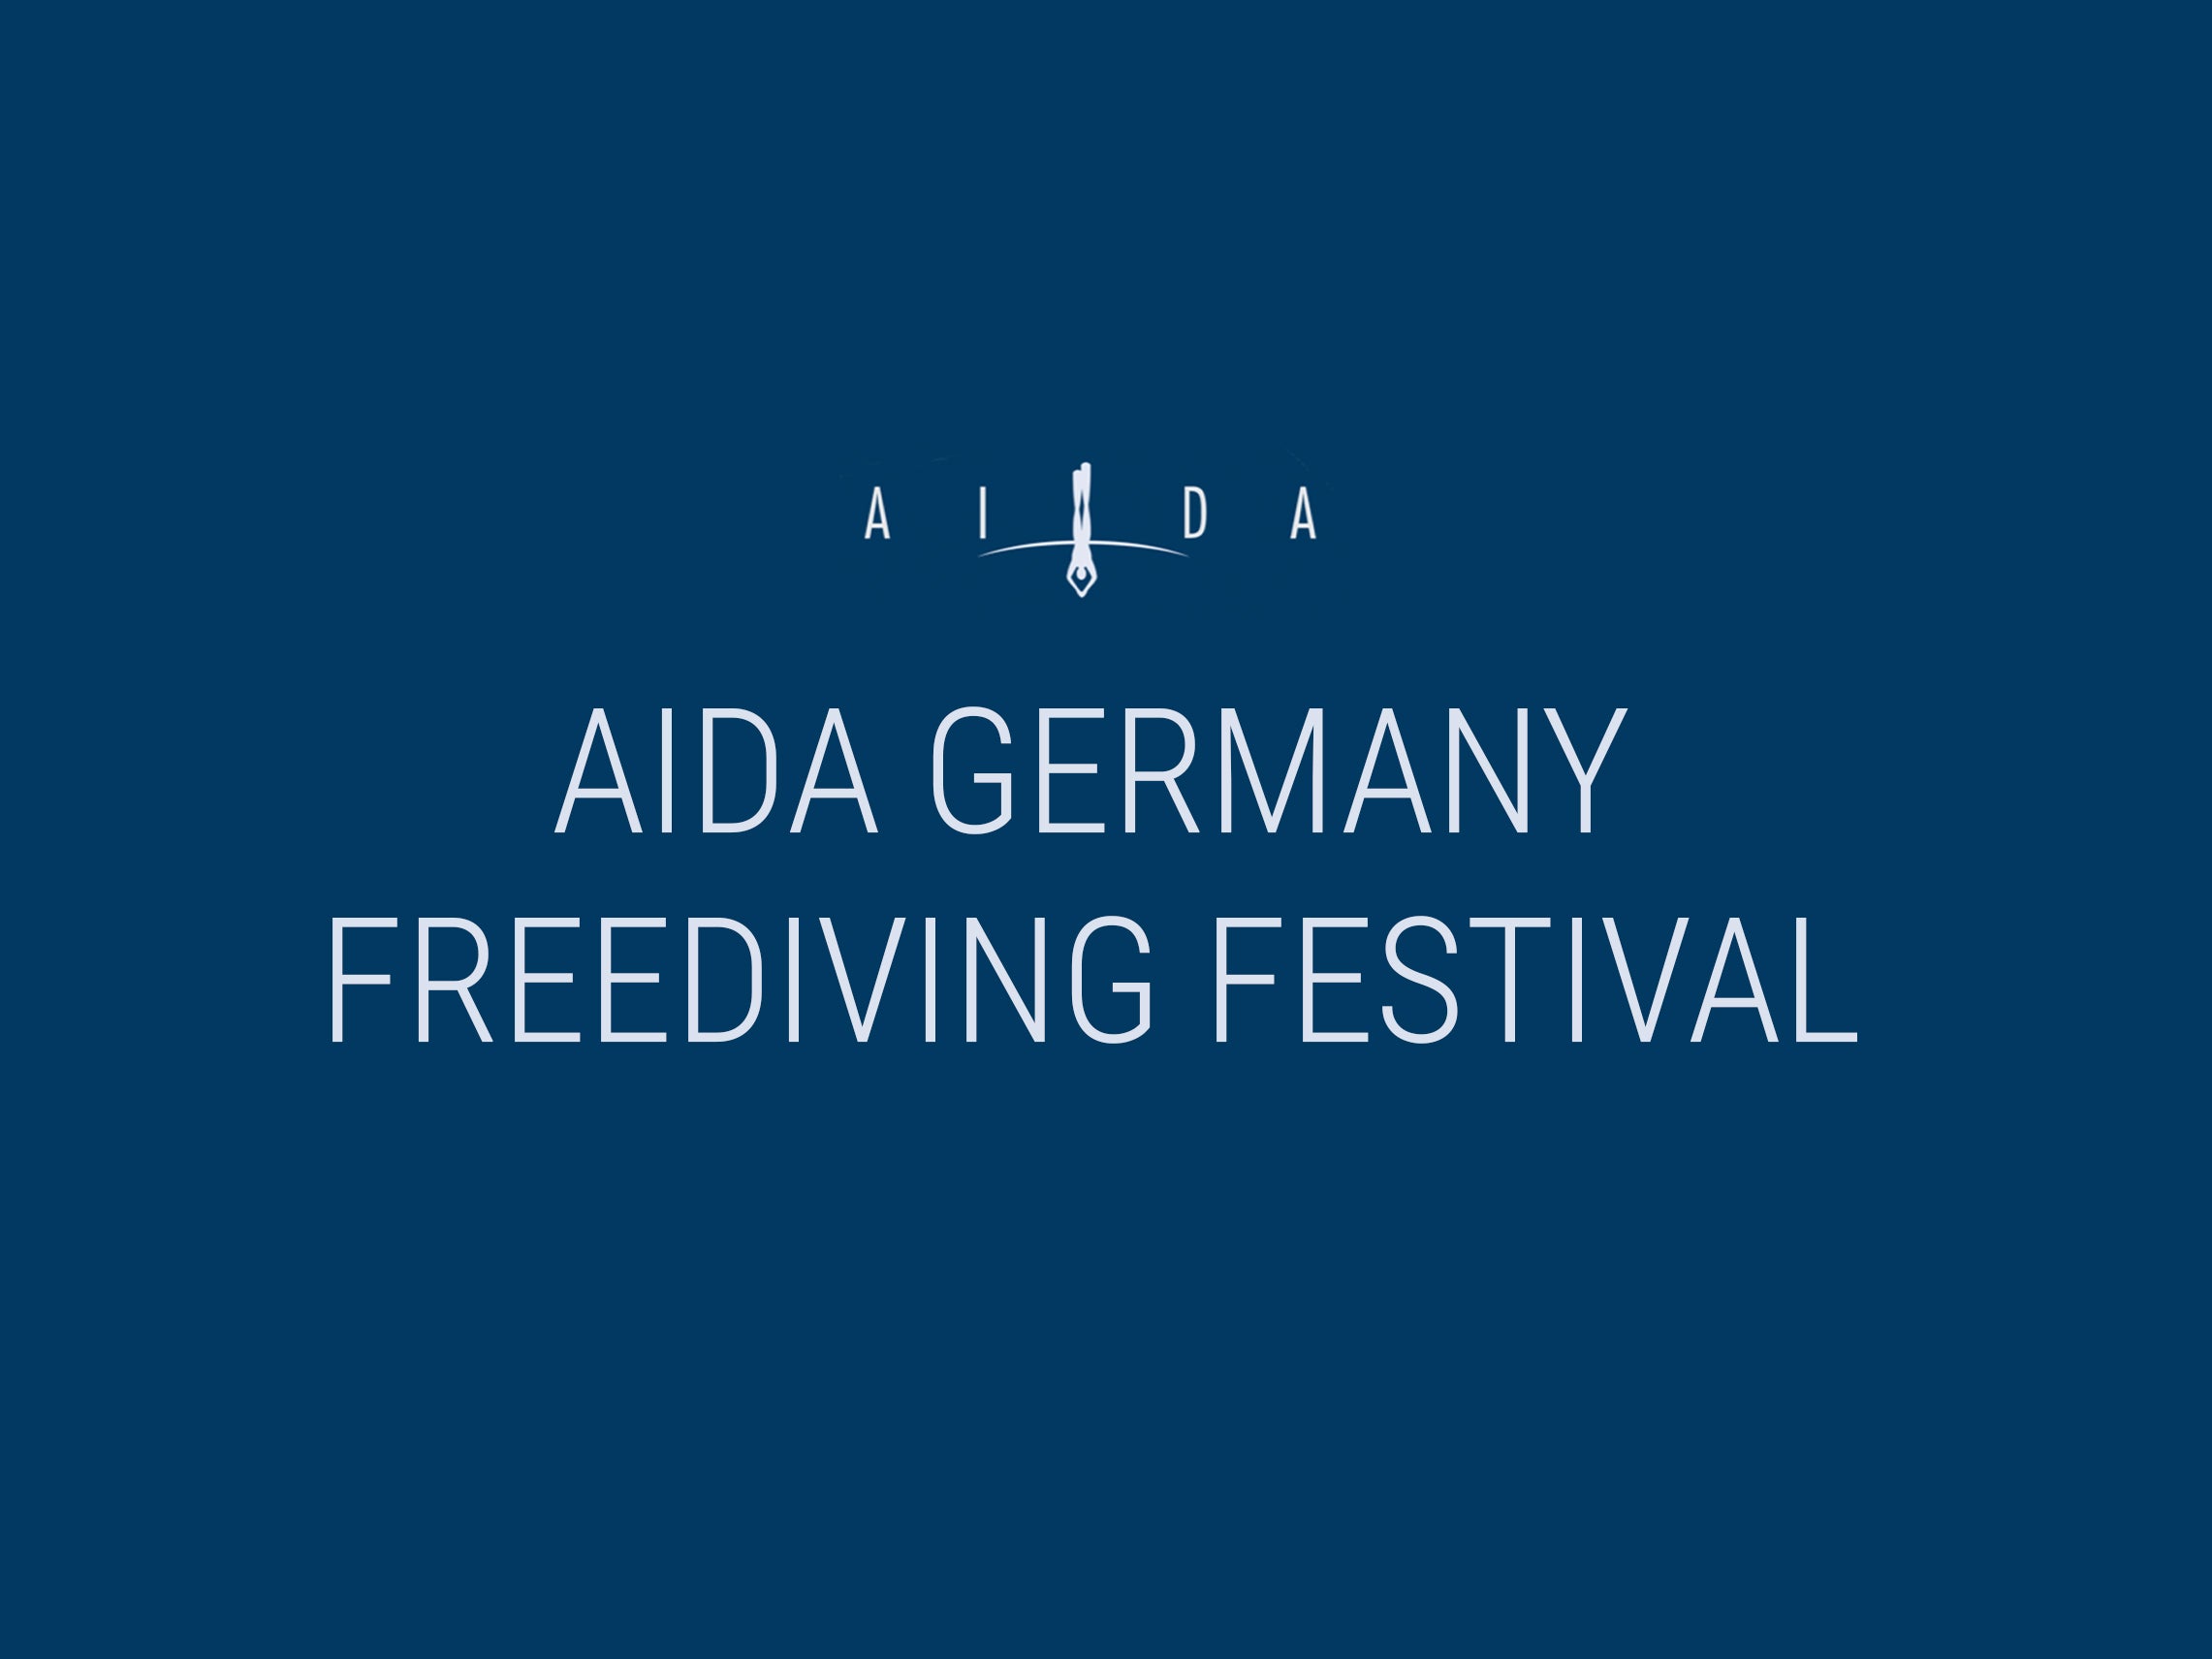 AIDA Germany Celebrates 25 Years with a Freediving Festival